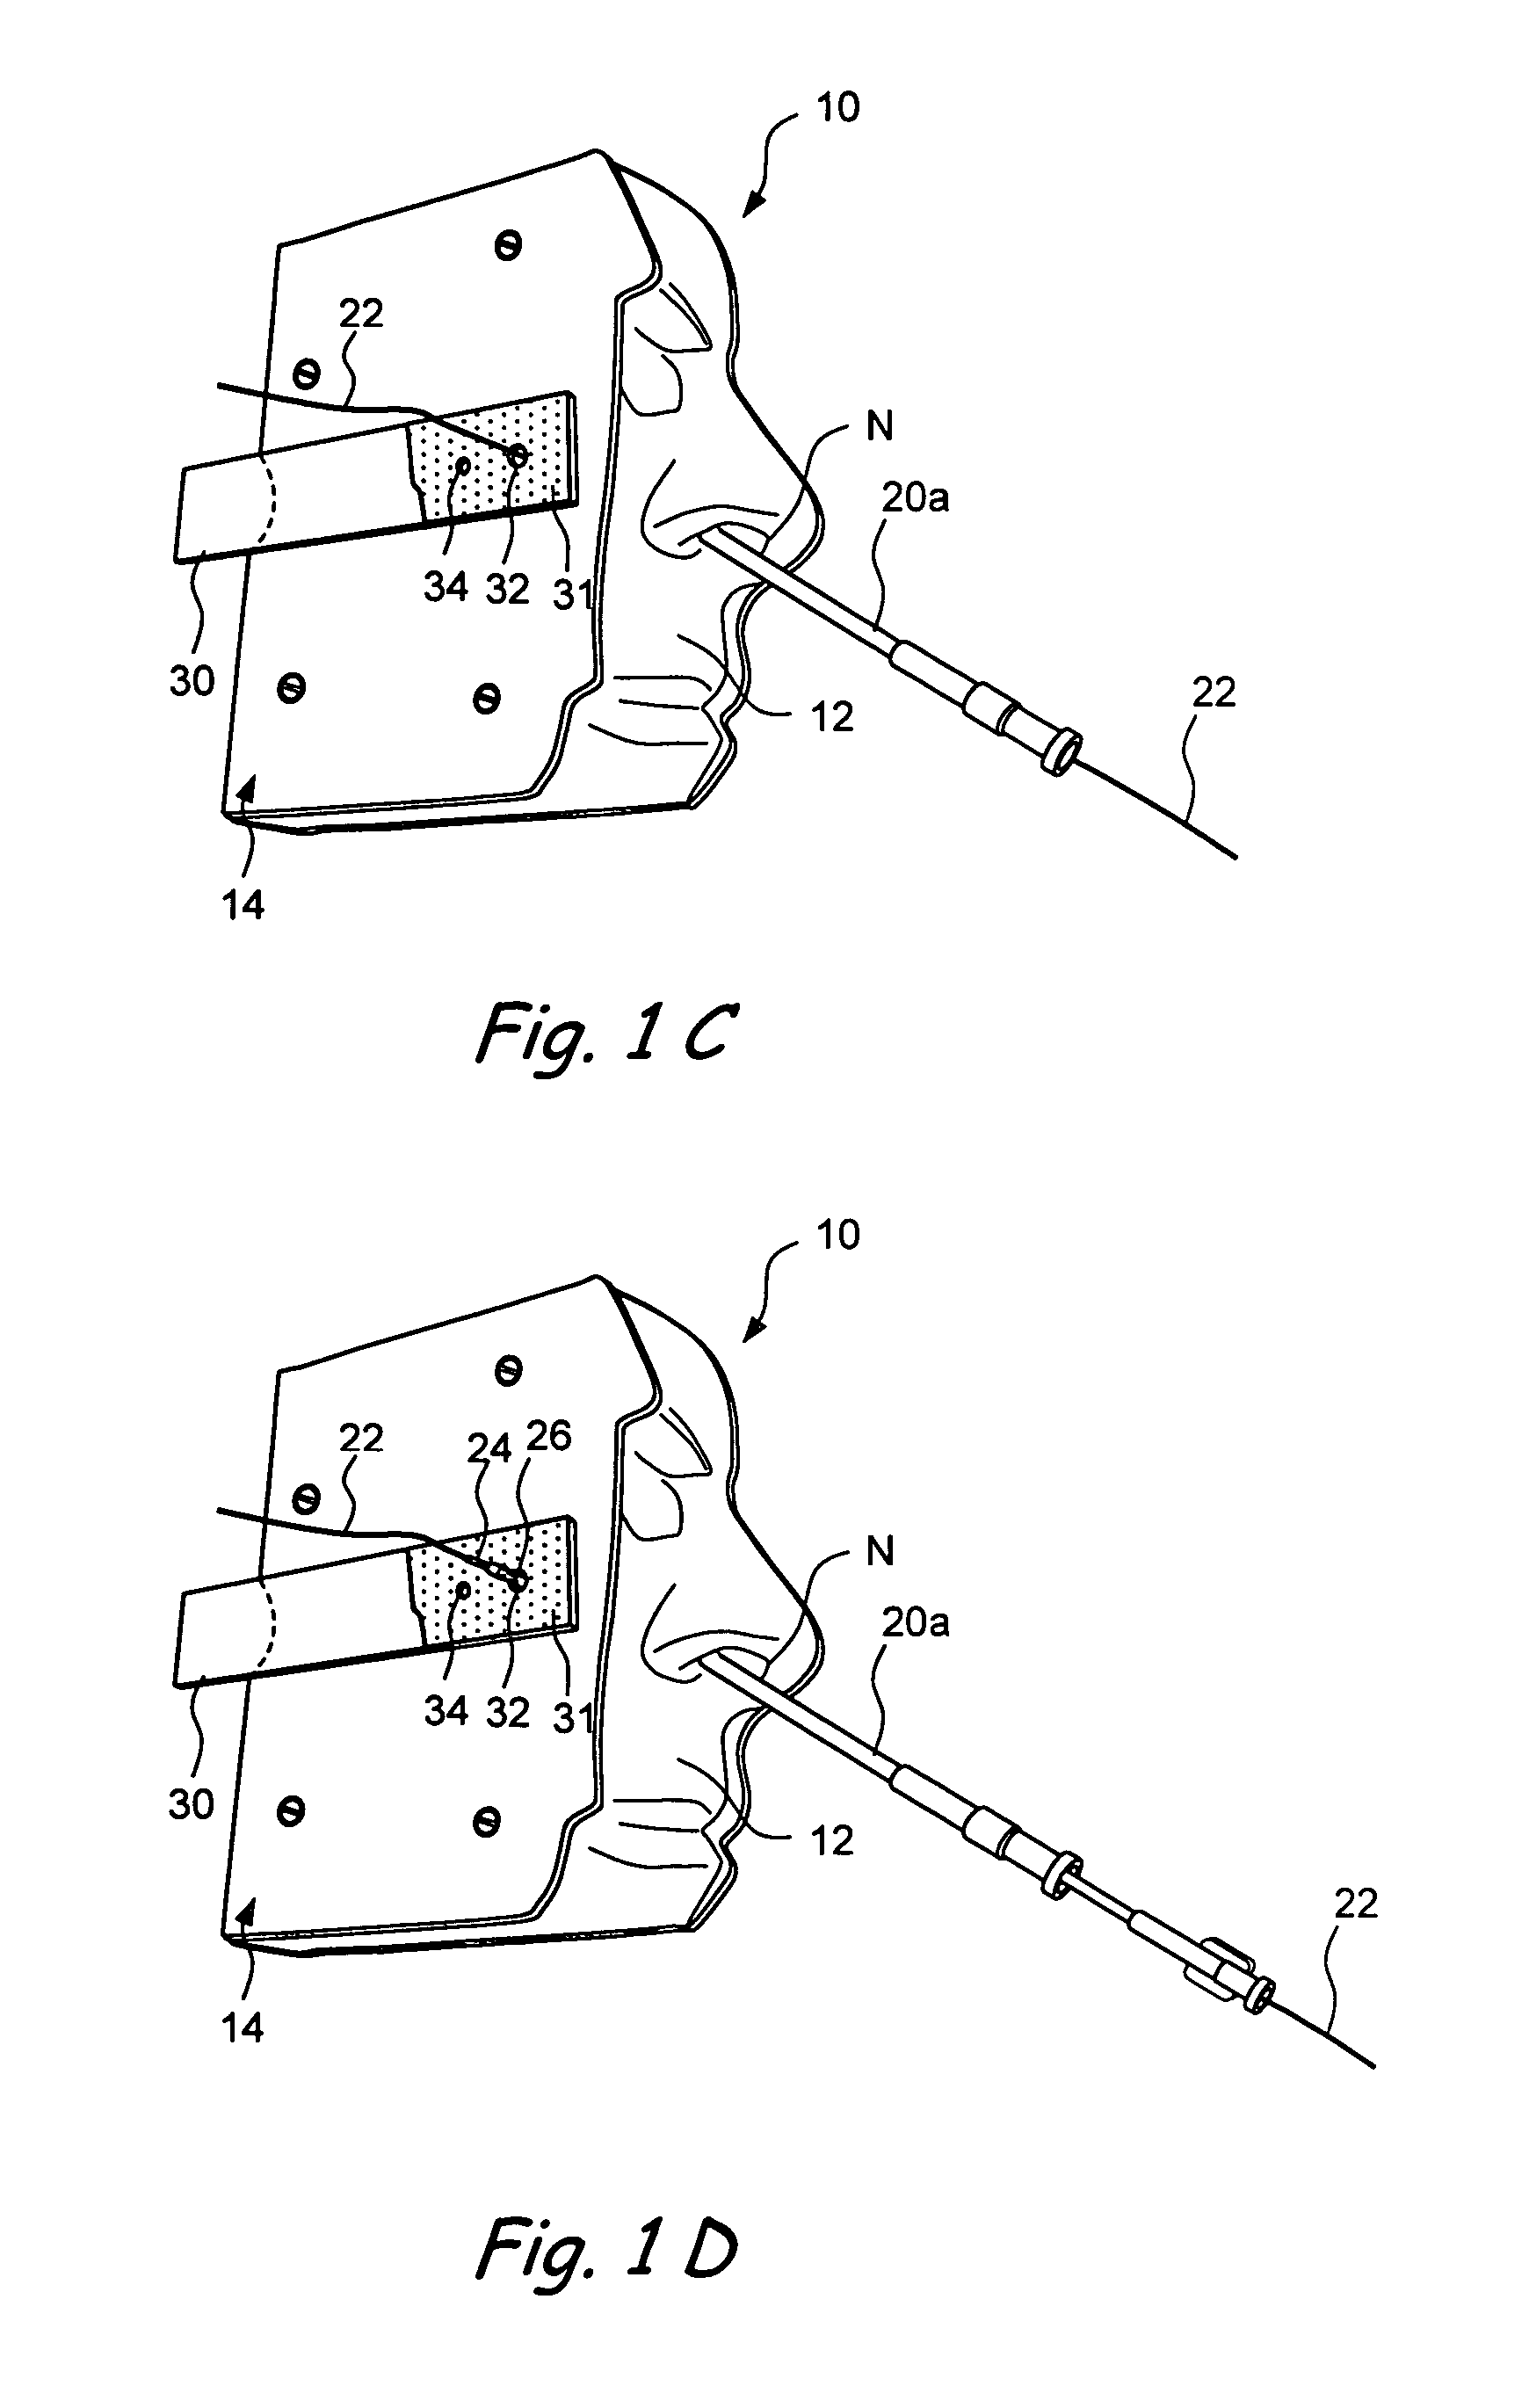 Anatomical models and methods for training and demonstration of medical procedures